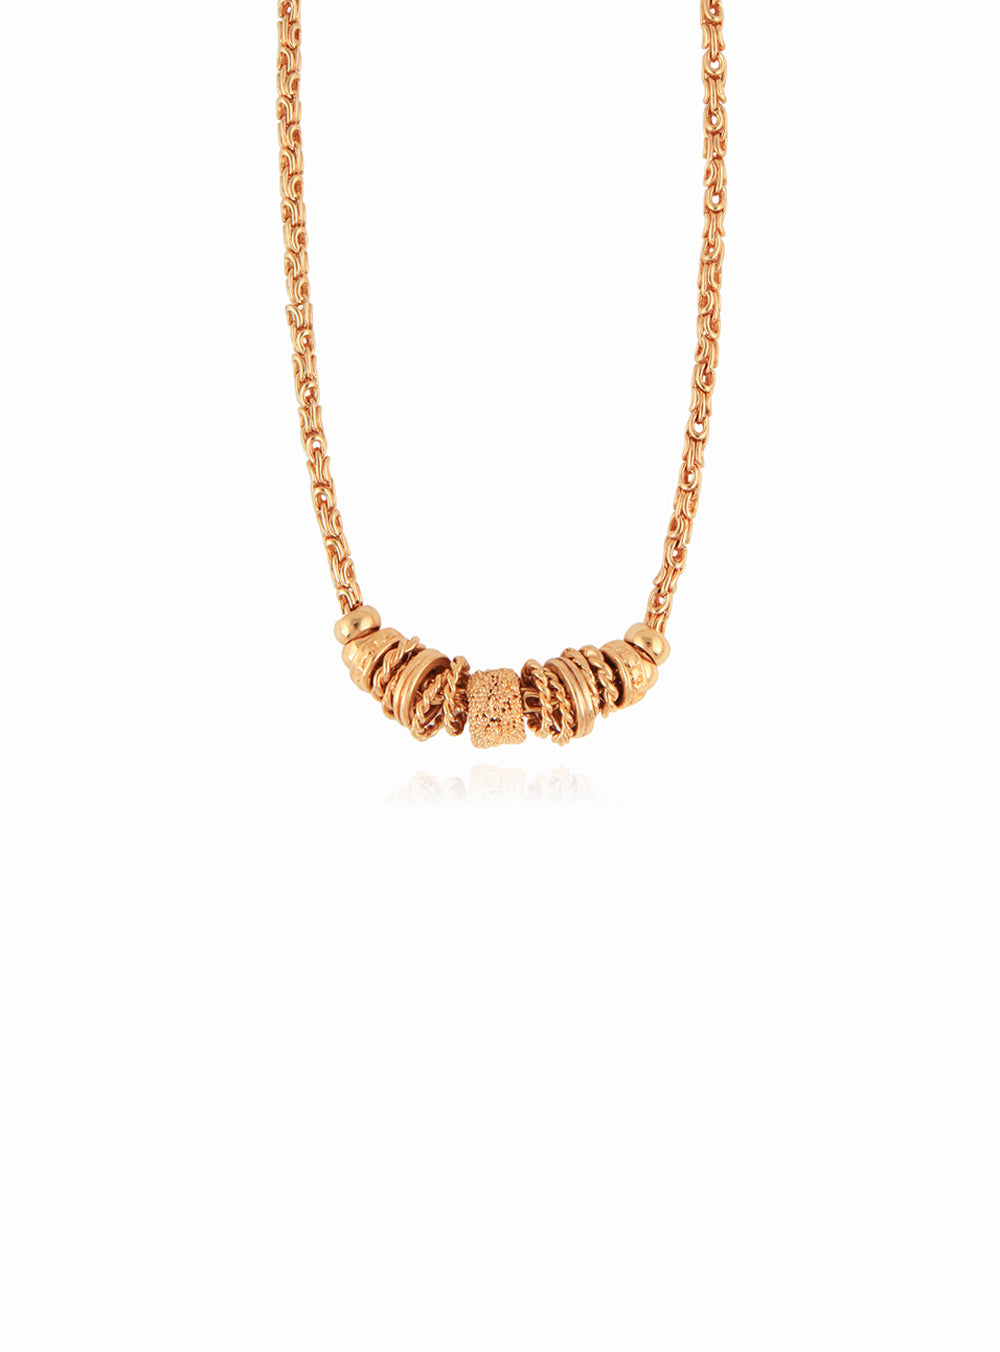 GOLD MARQUISE NECKLACE